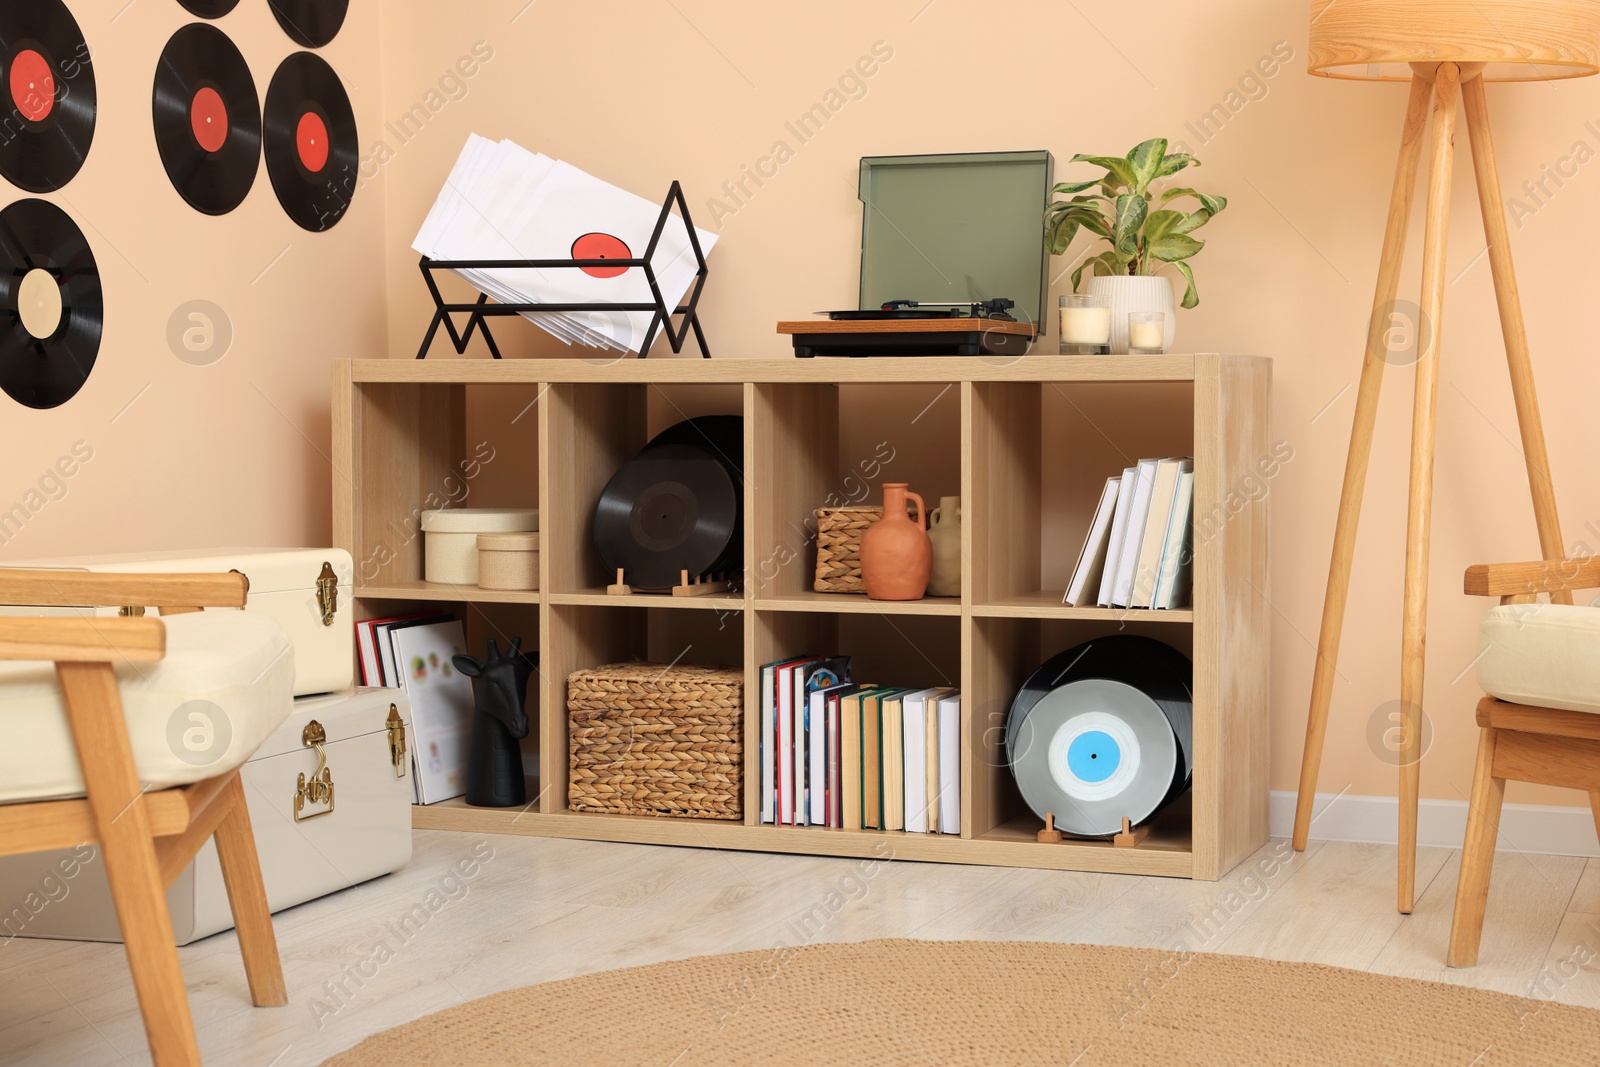 Photo of Vinyl record player on wooden shelving unit indoors